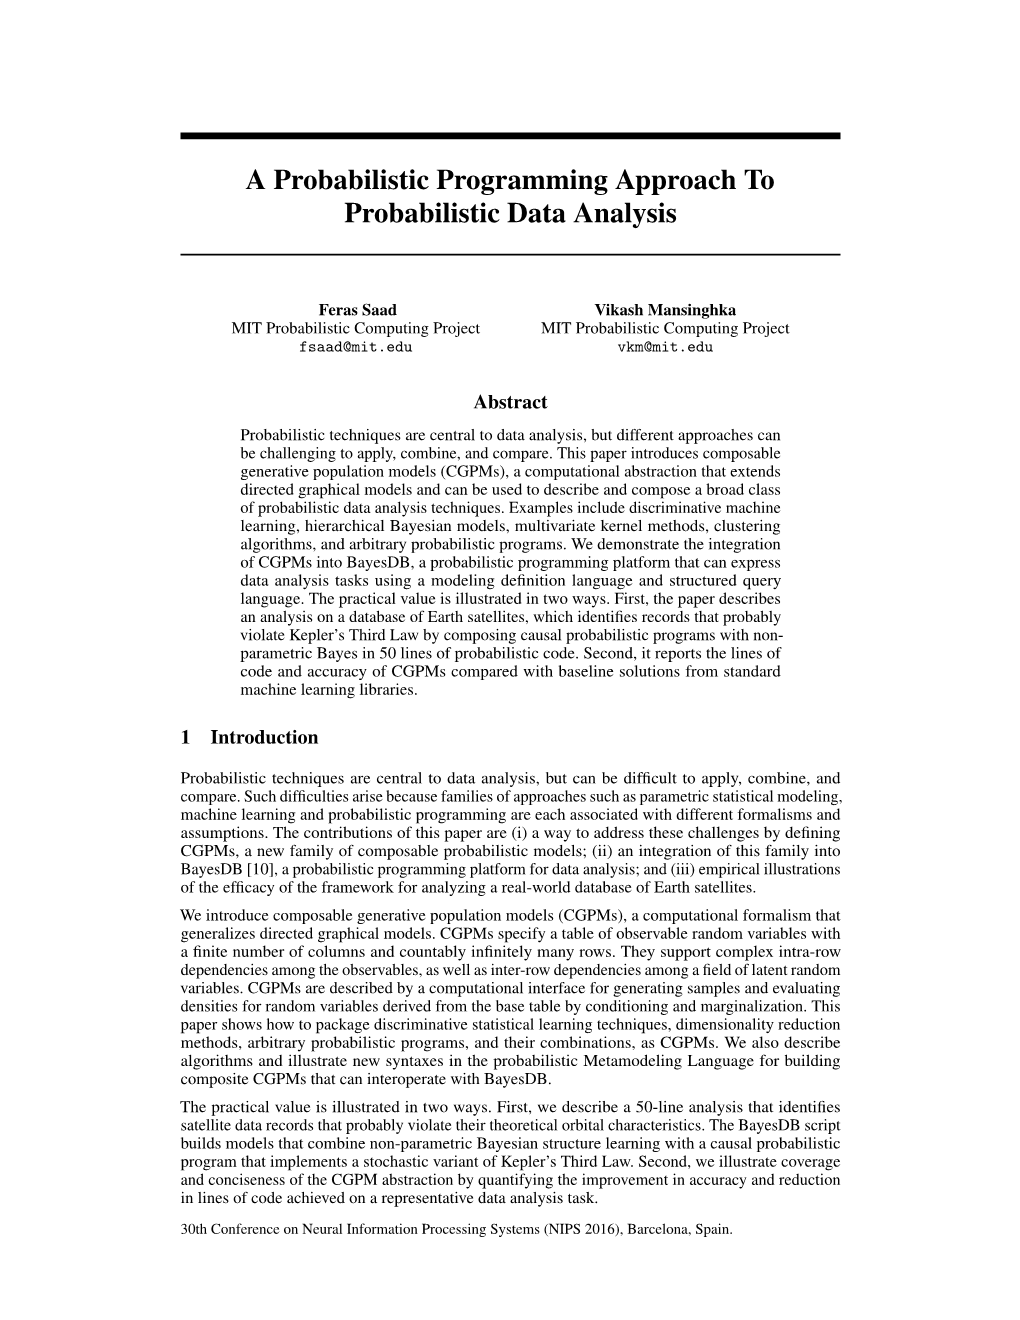 A Probabilistic Programming Approach to Probabilistic Data Analysis